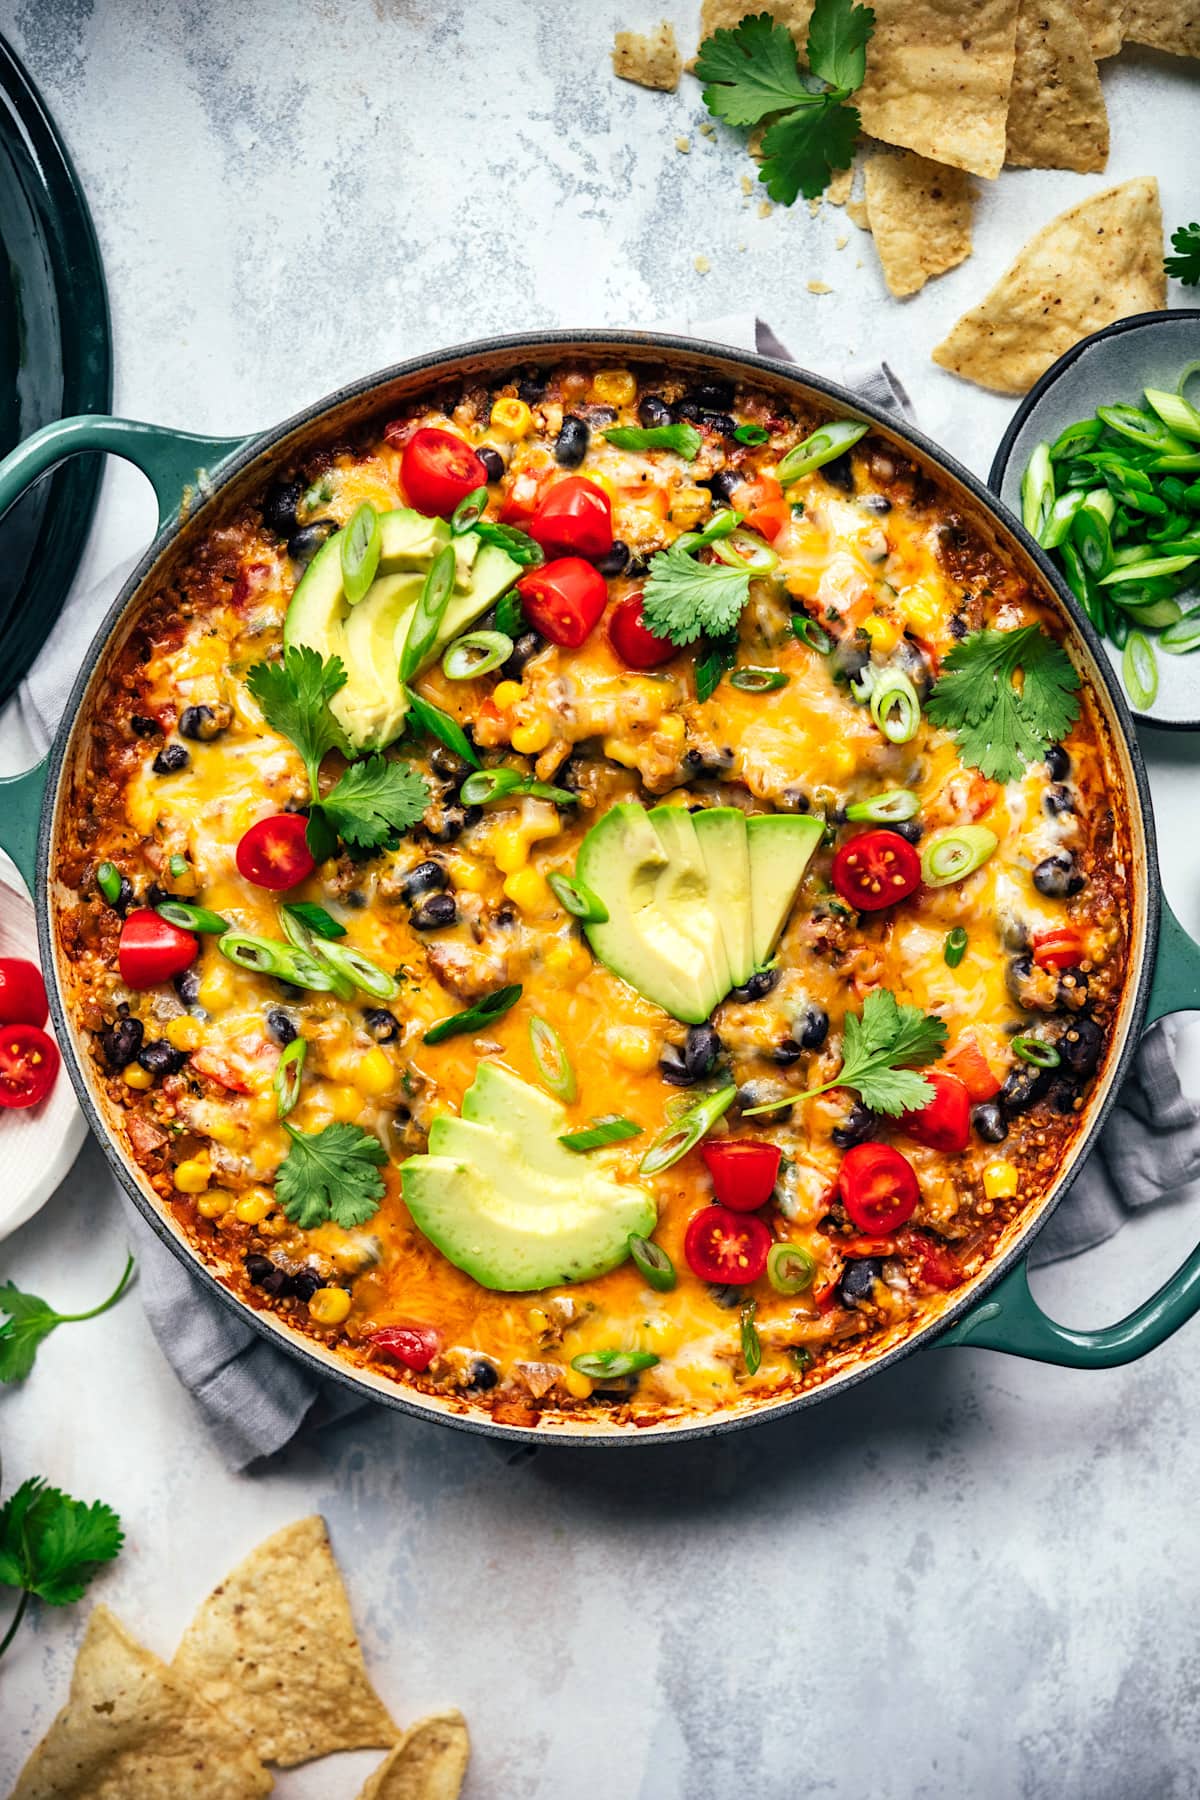 29 Recipes to Make the Most Out of Your Cast Iron Skillet